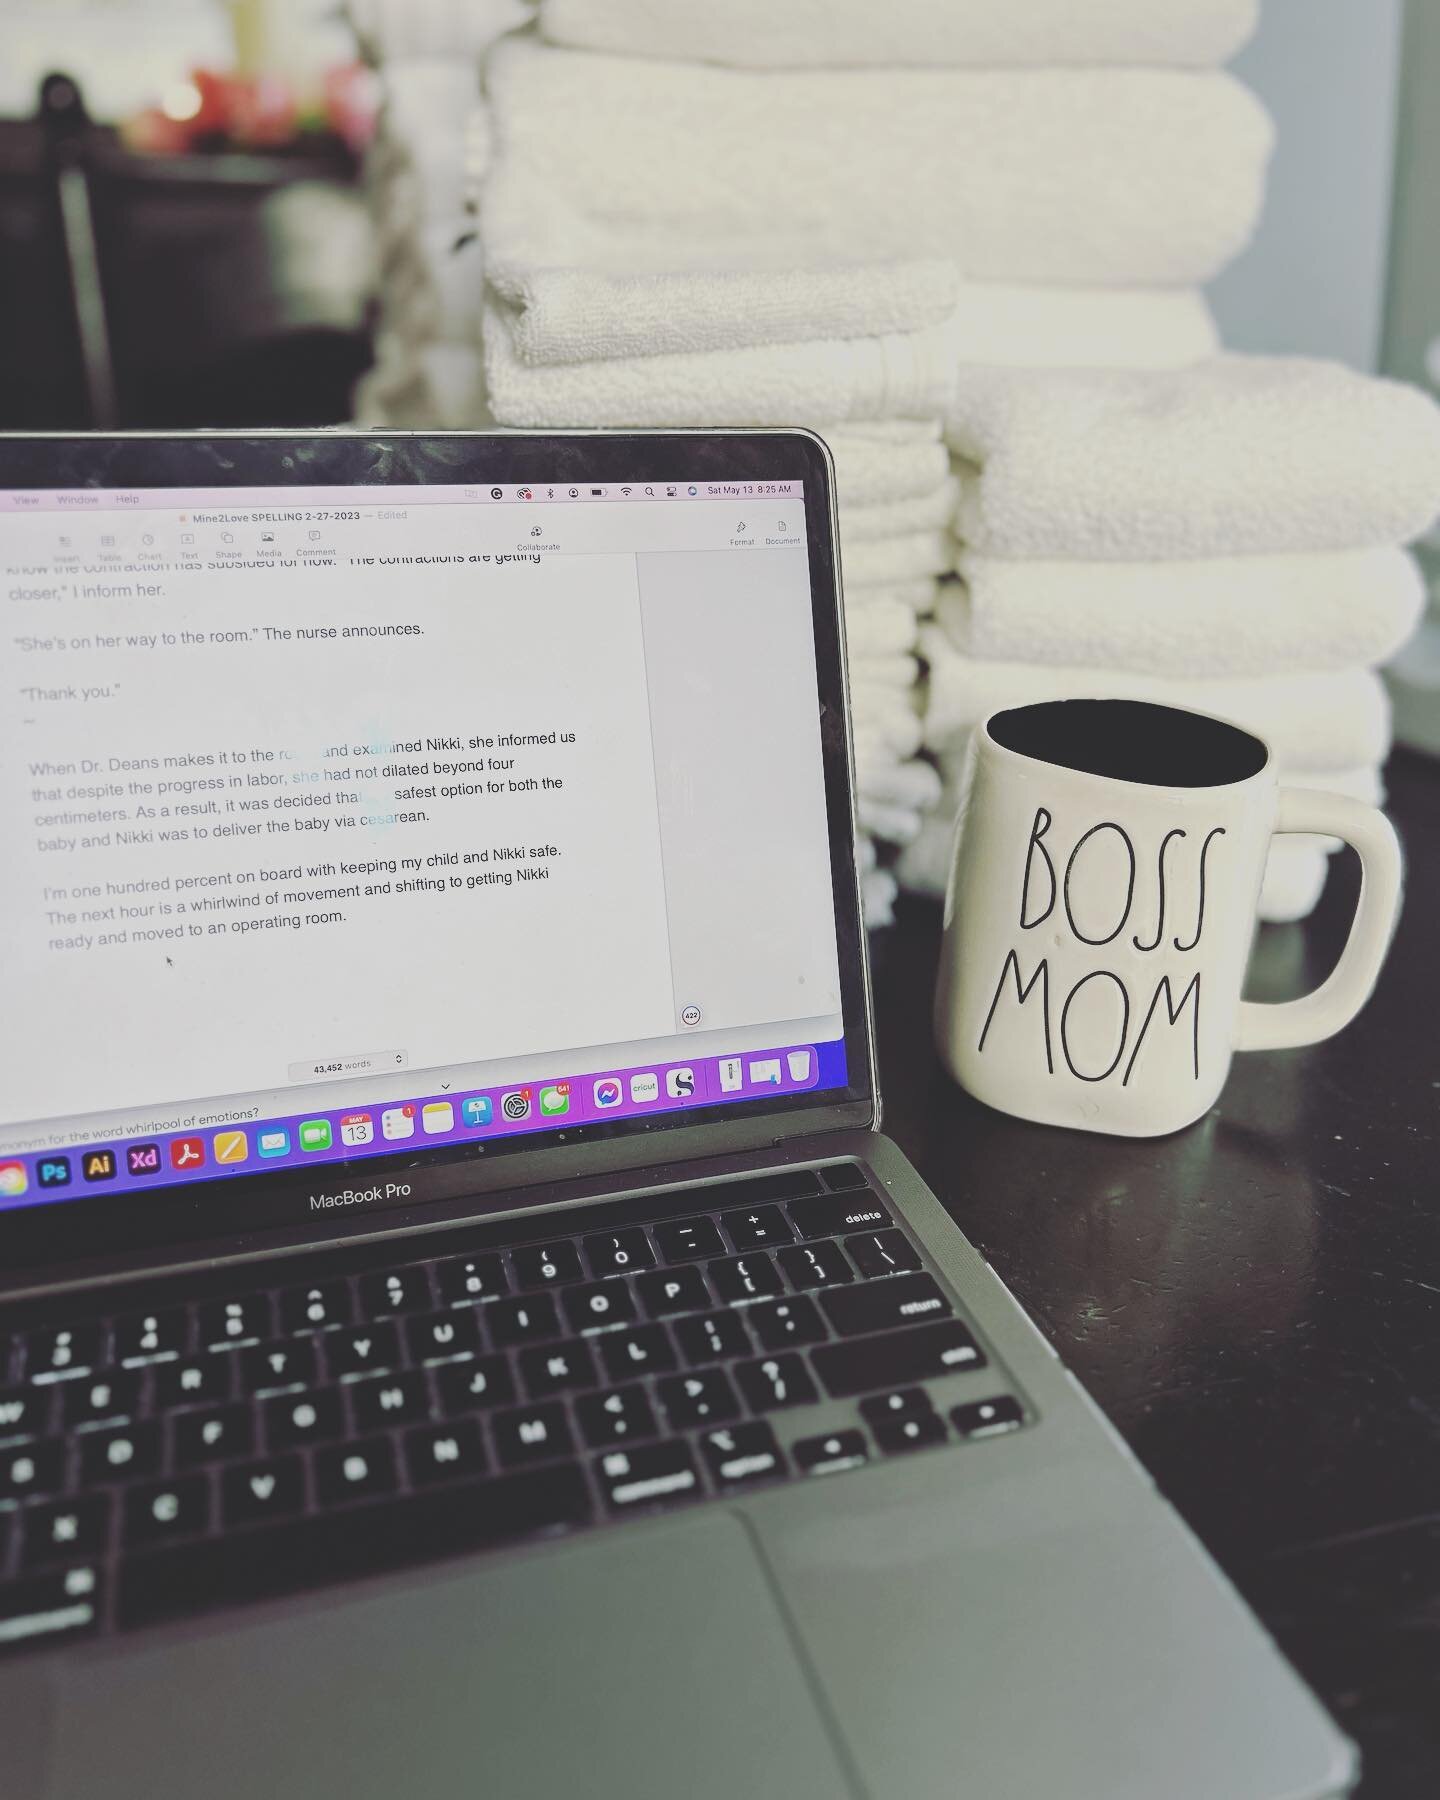 Moving through Saturday like a #bossmom.
✔️editing 
✔️graphic design work
✔️laundry 
✔️clean house 
.
#momlife #authorlife #graphicdesignlife